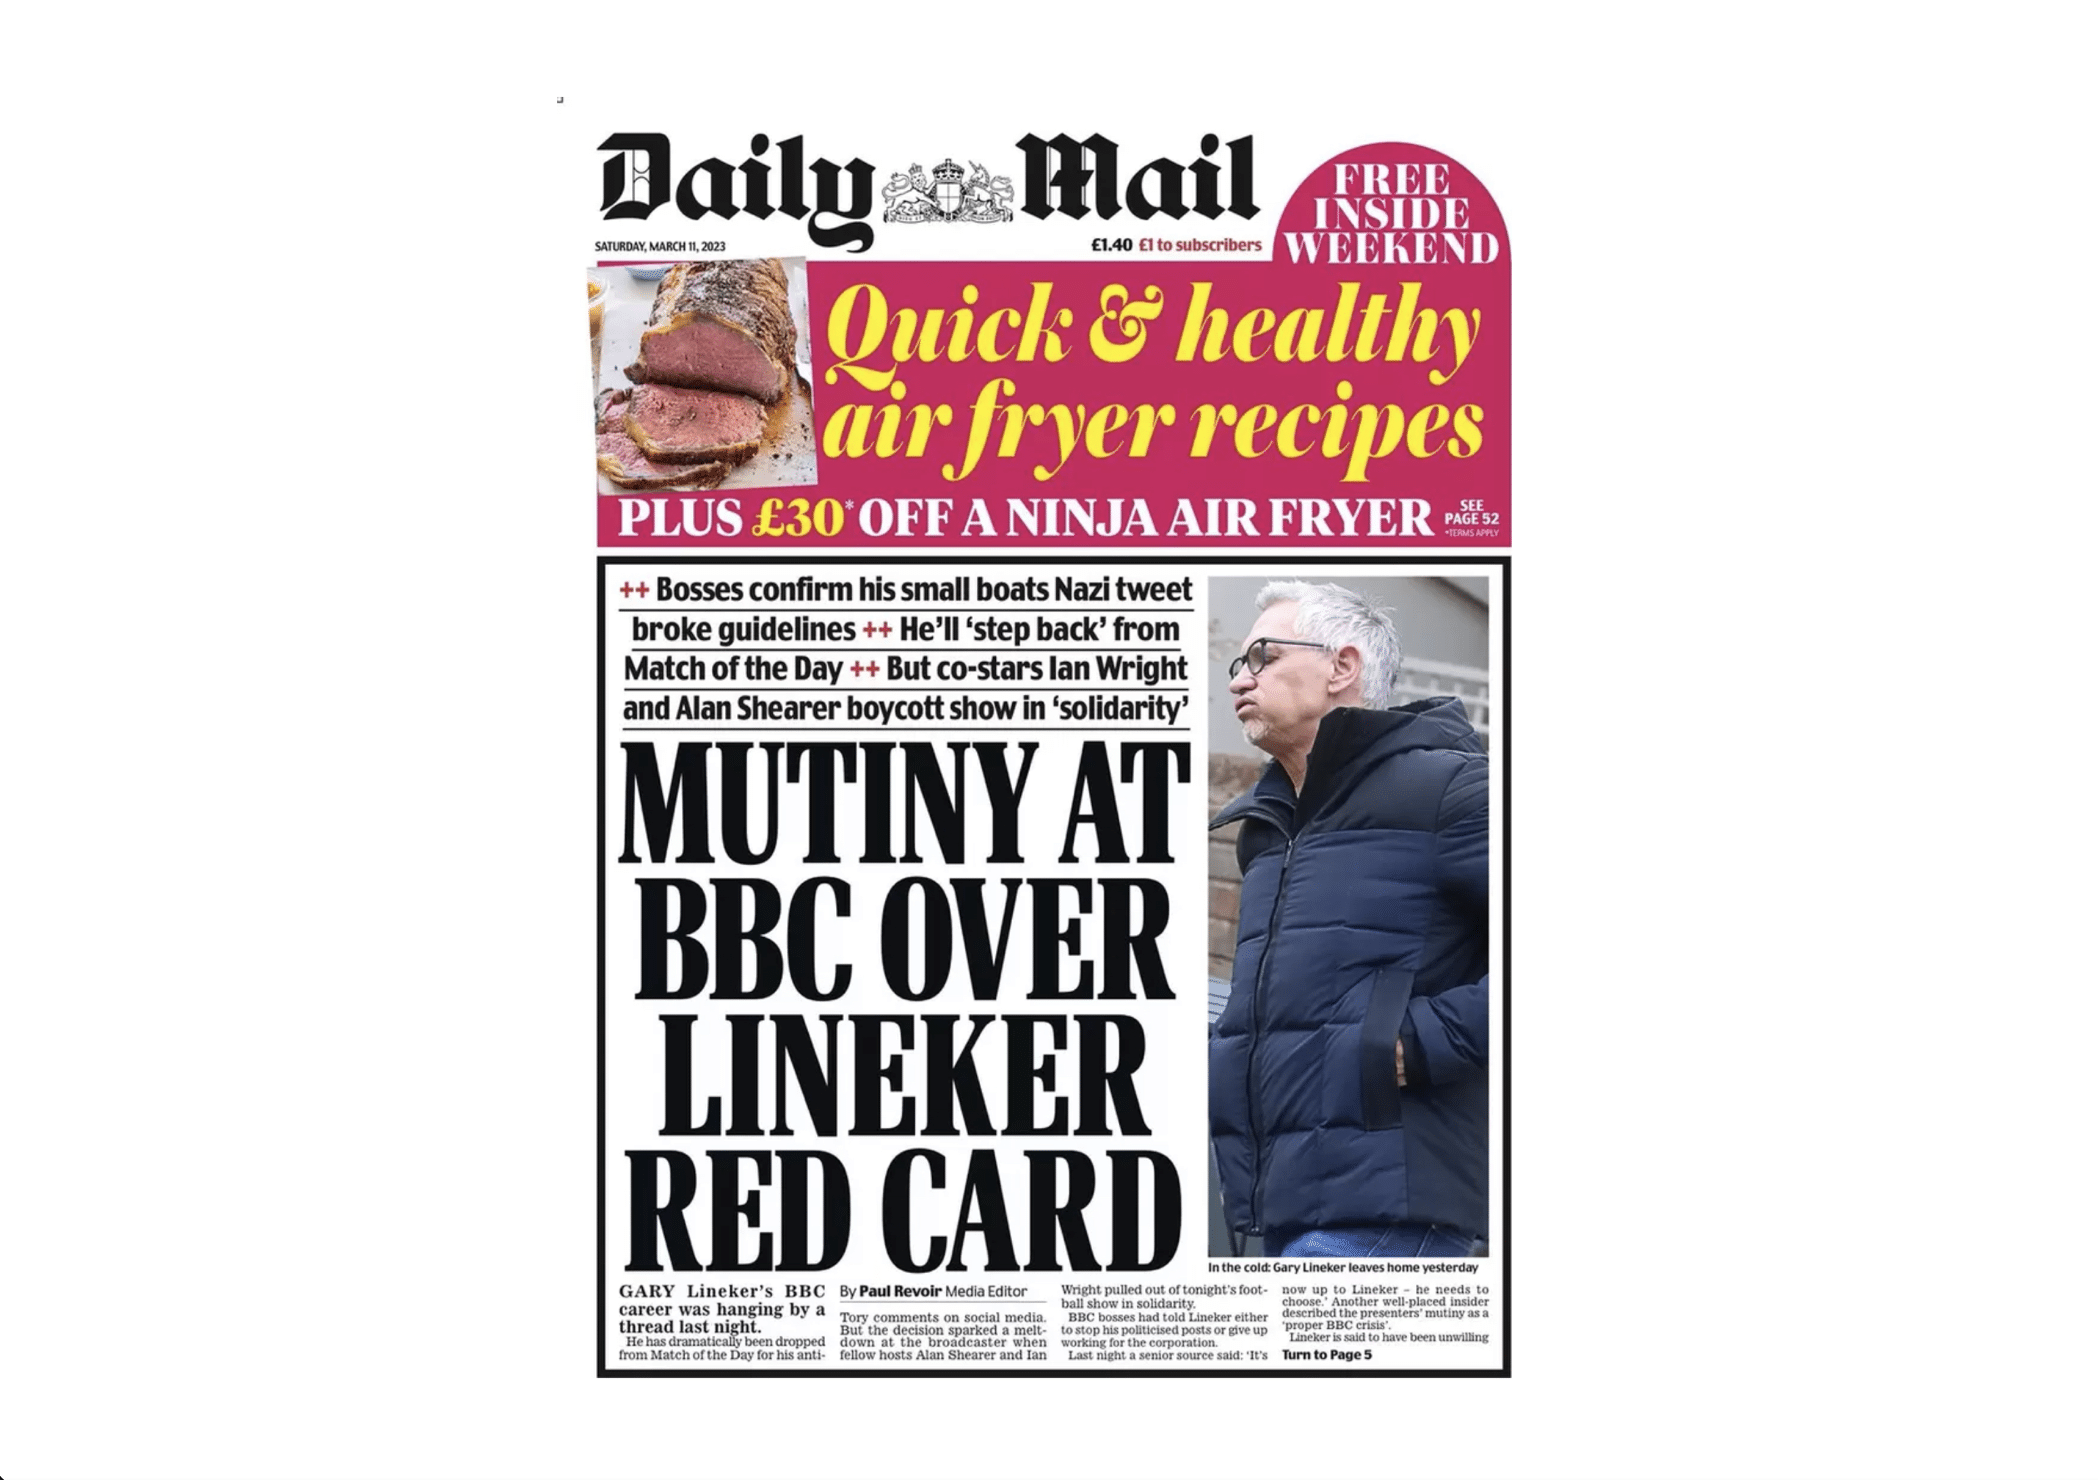 Saturday's Daily Mail front page